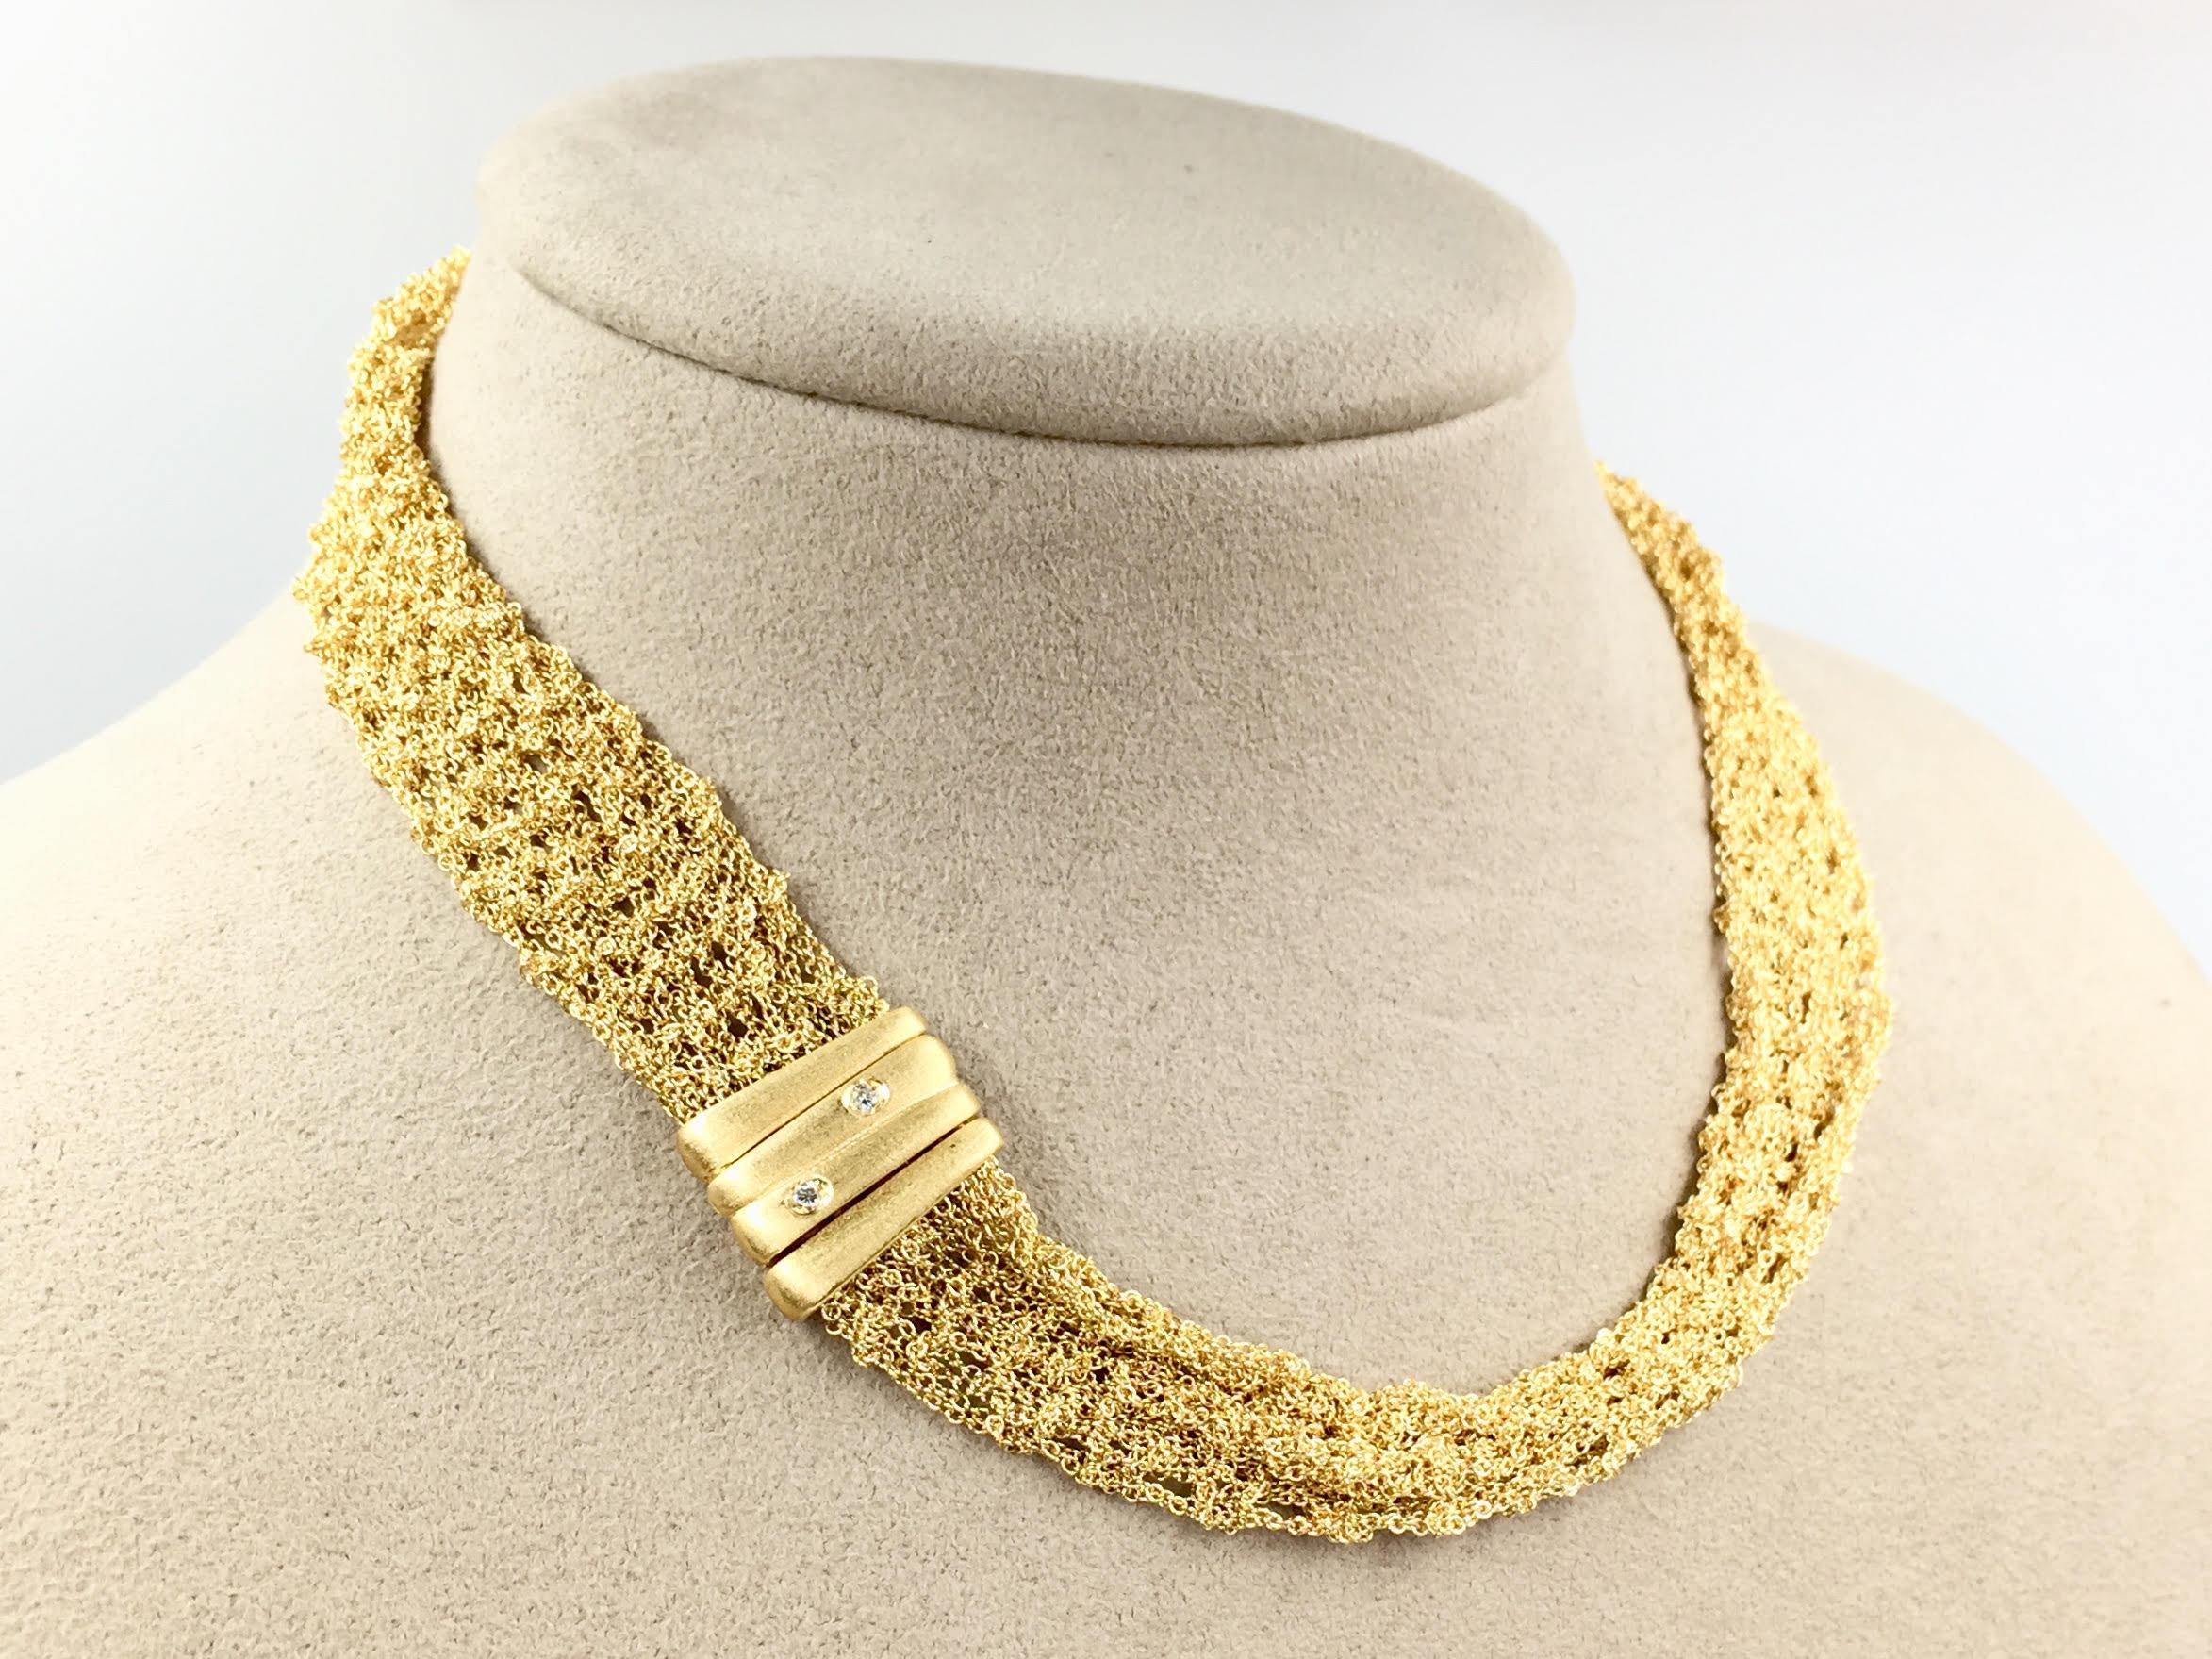 All 18 karat yellow gold mesh necklace designed by Gori and Zucchi. Expertly woven gold chains lay beautifully on the collar of the neck at a 16